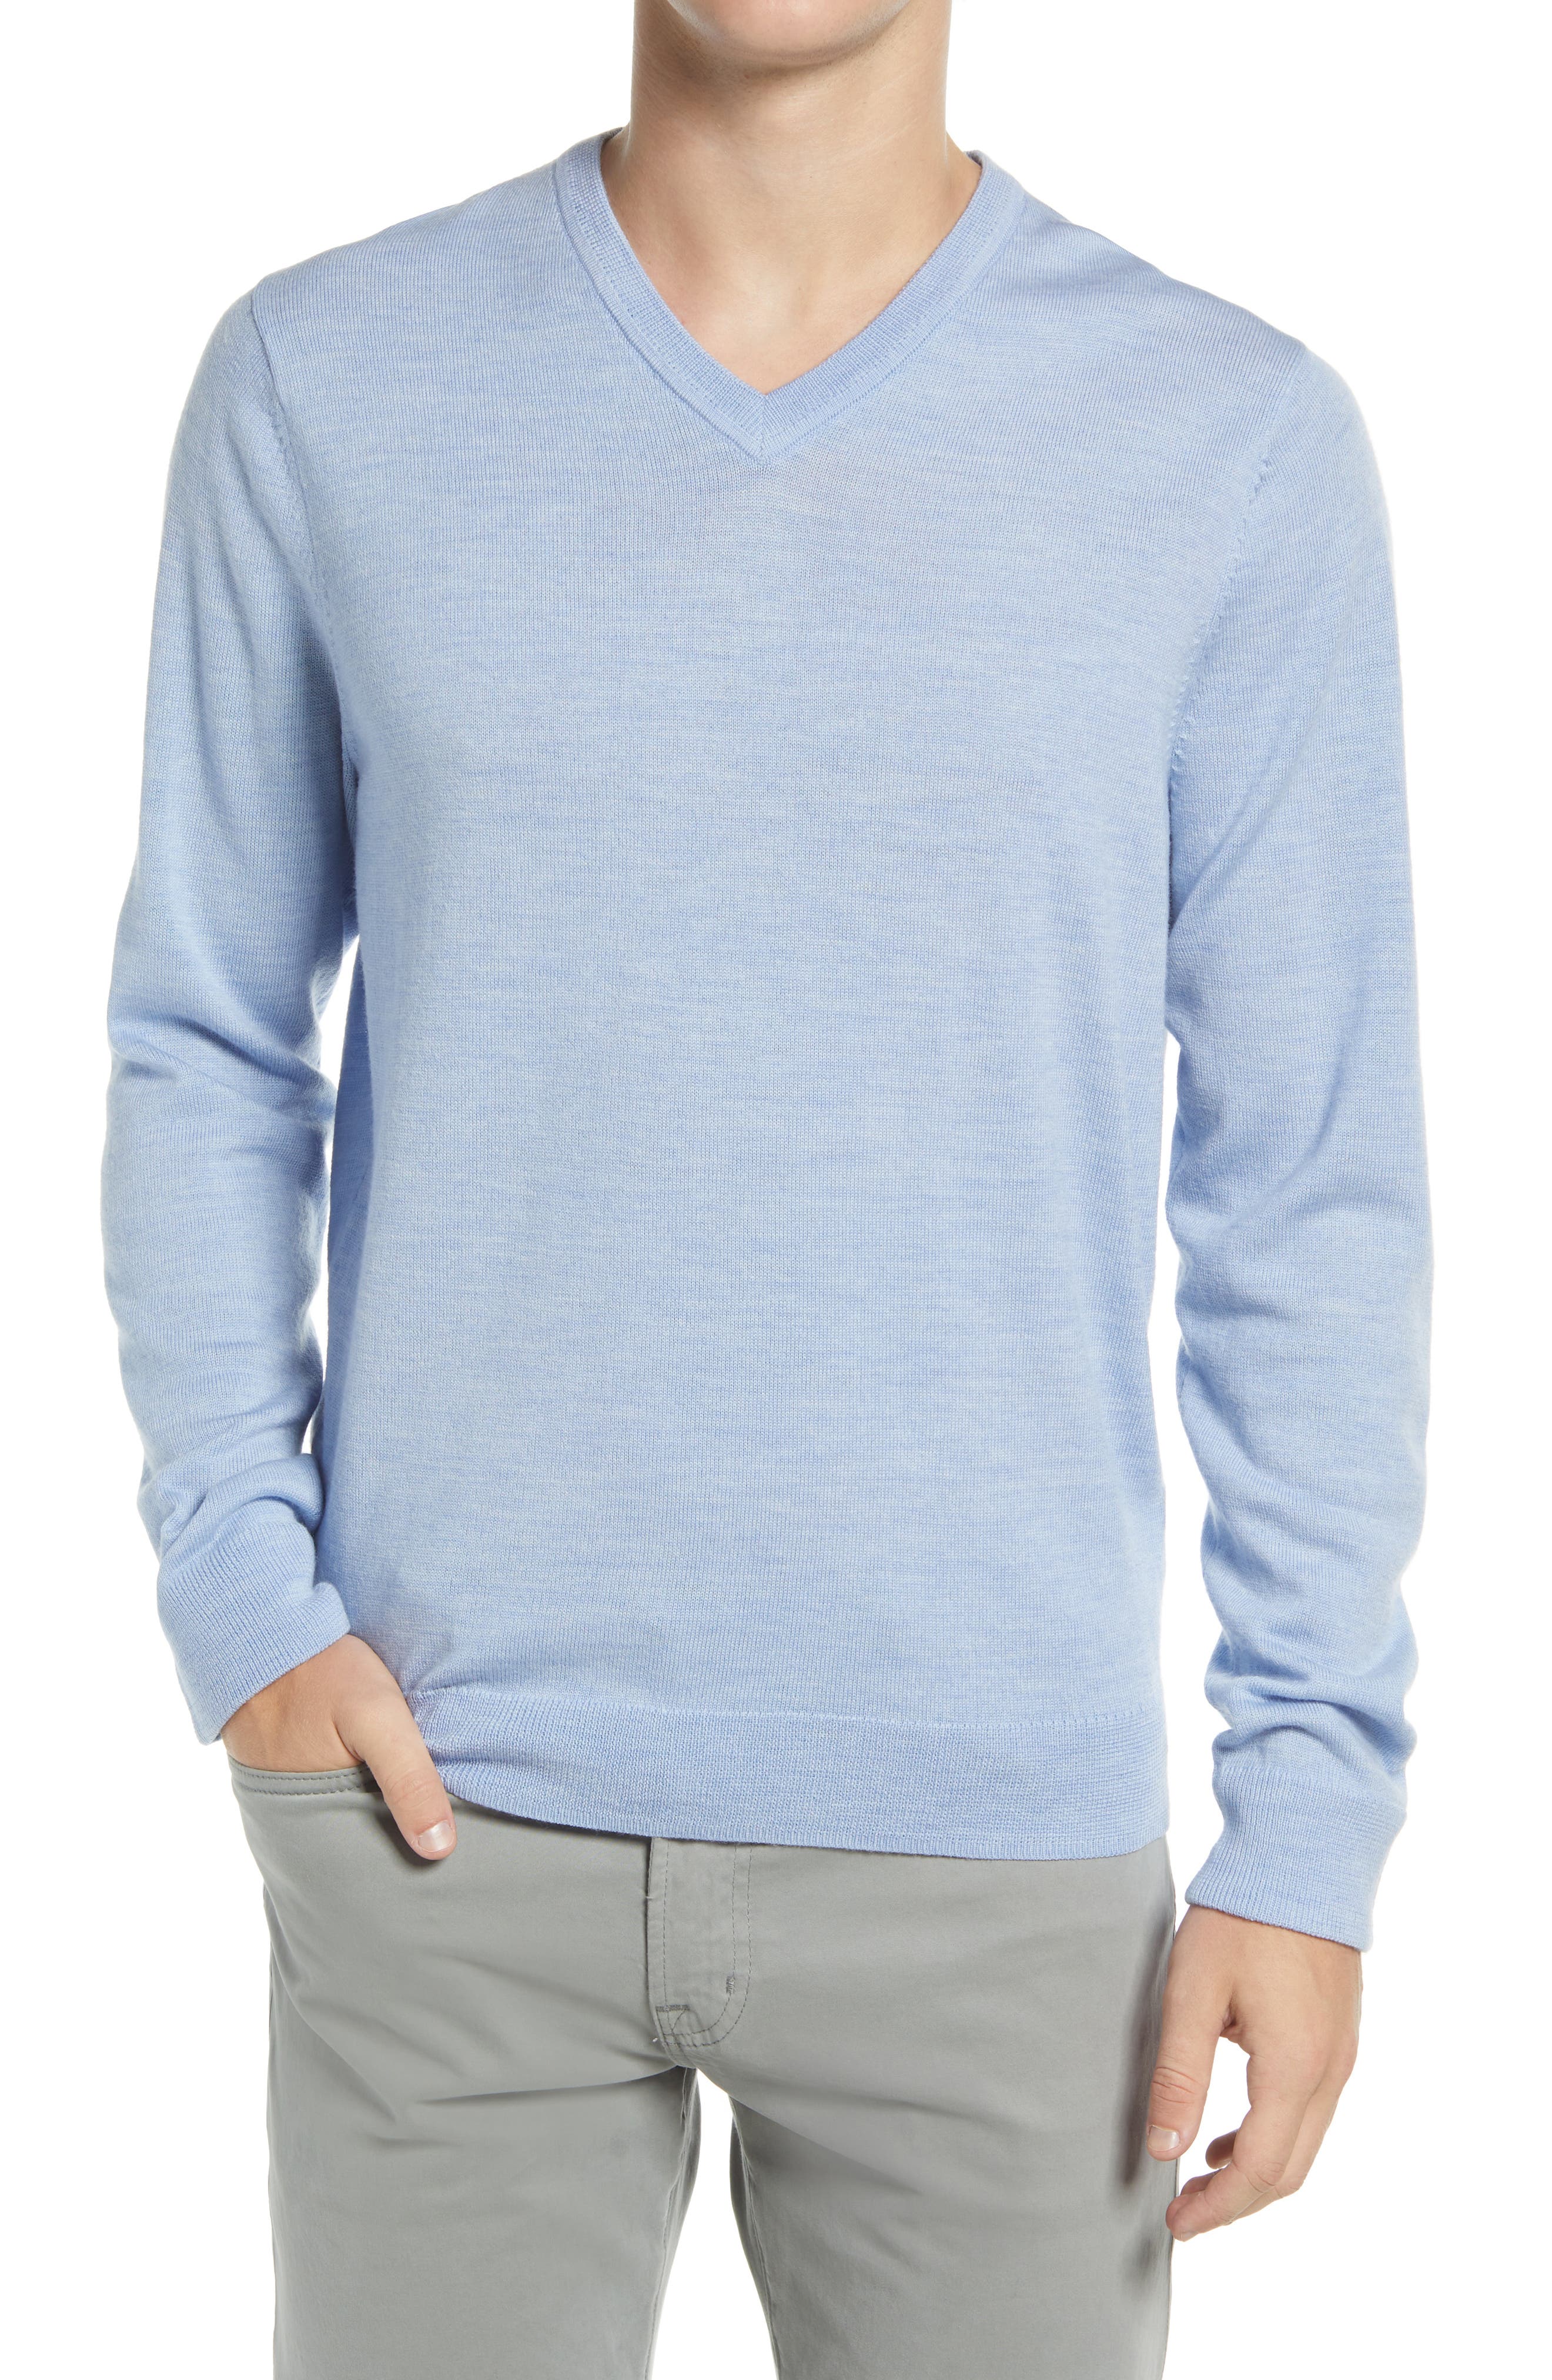 New Mens Long Sleeve V-Neck  Branded Pullover 100/% Cotton Jumper Sweater Top